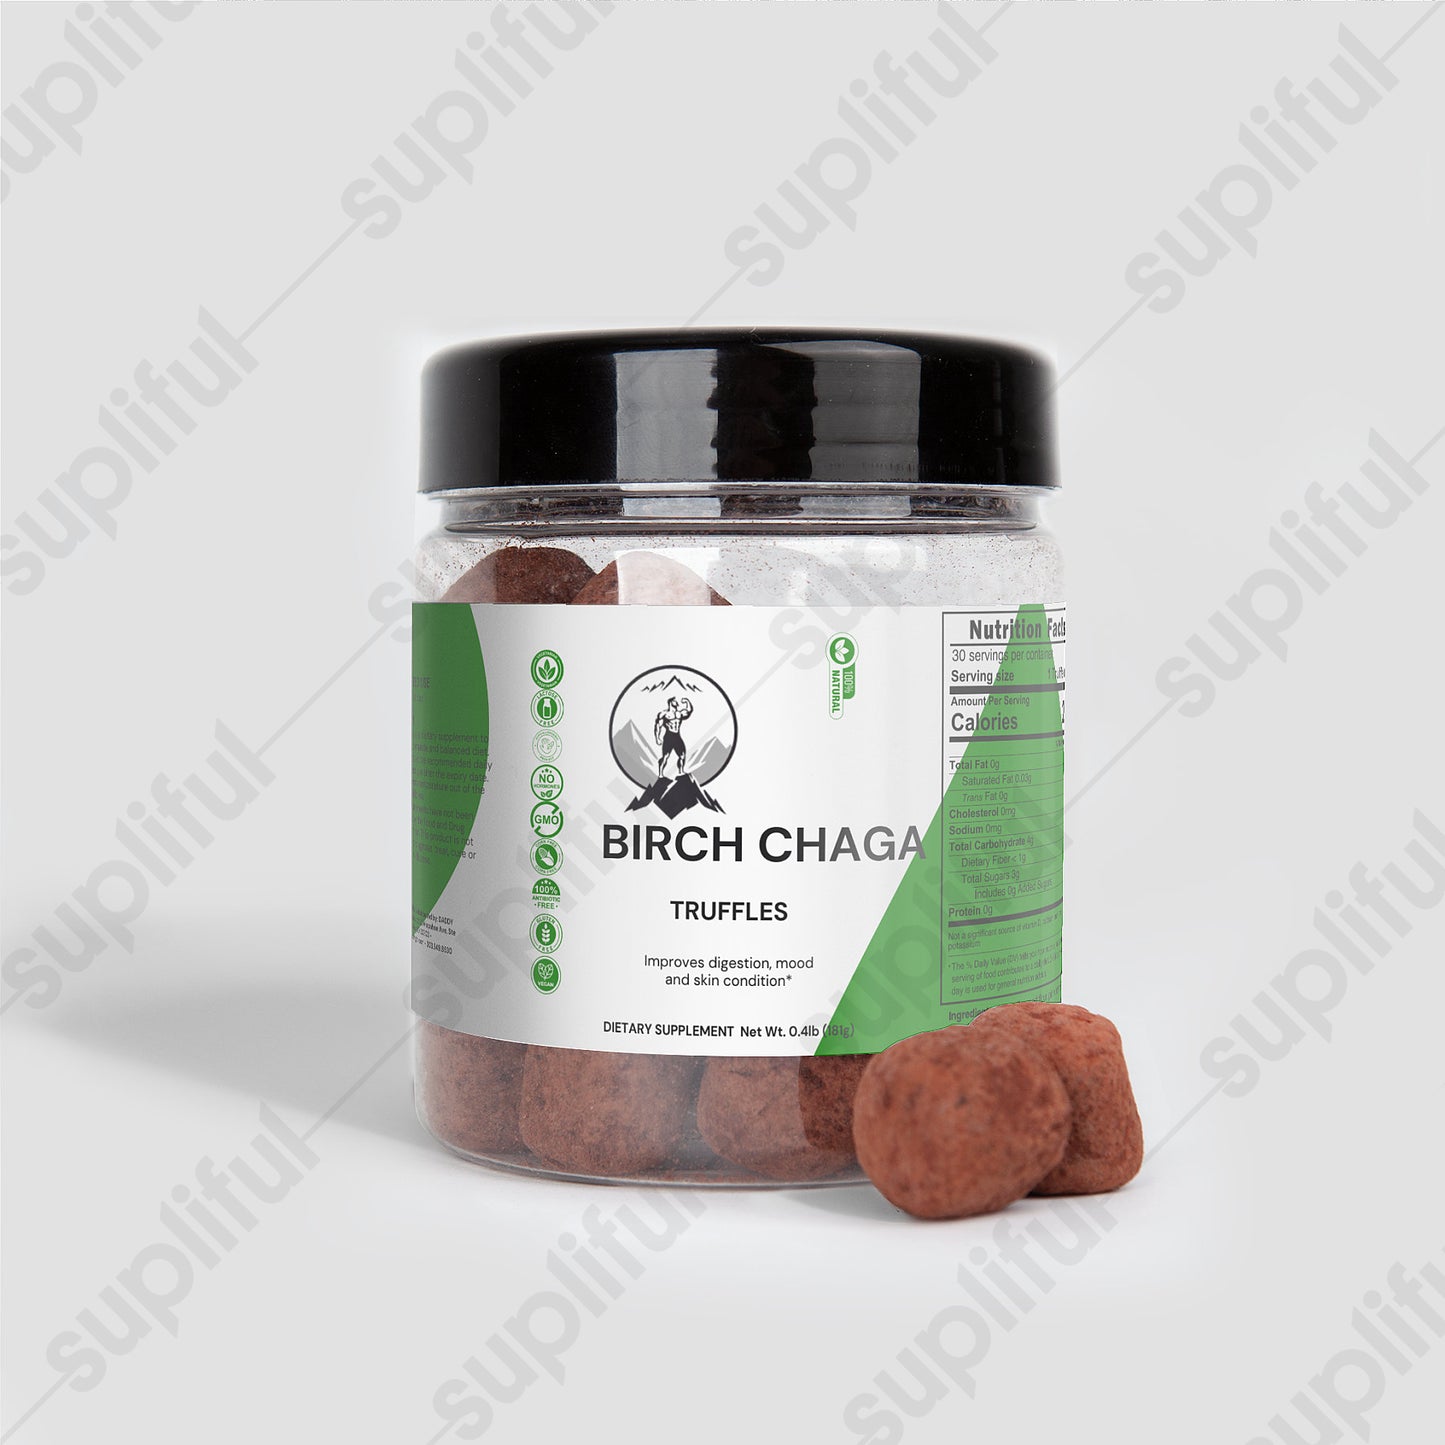 Birch Chaga TrufflesNatural ExtractsToday’s foods are often grown in mineral-depleted soils void of essential nutrients like fulvic and humic acids, which can negatively affect your gut microbiome and Birch Chaga TrufflesThe Rocky Ranger